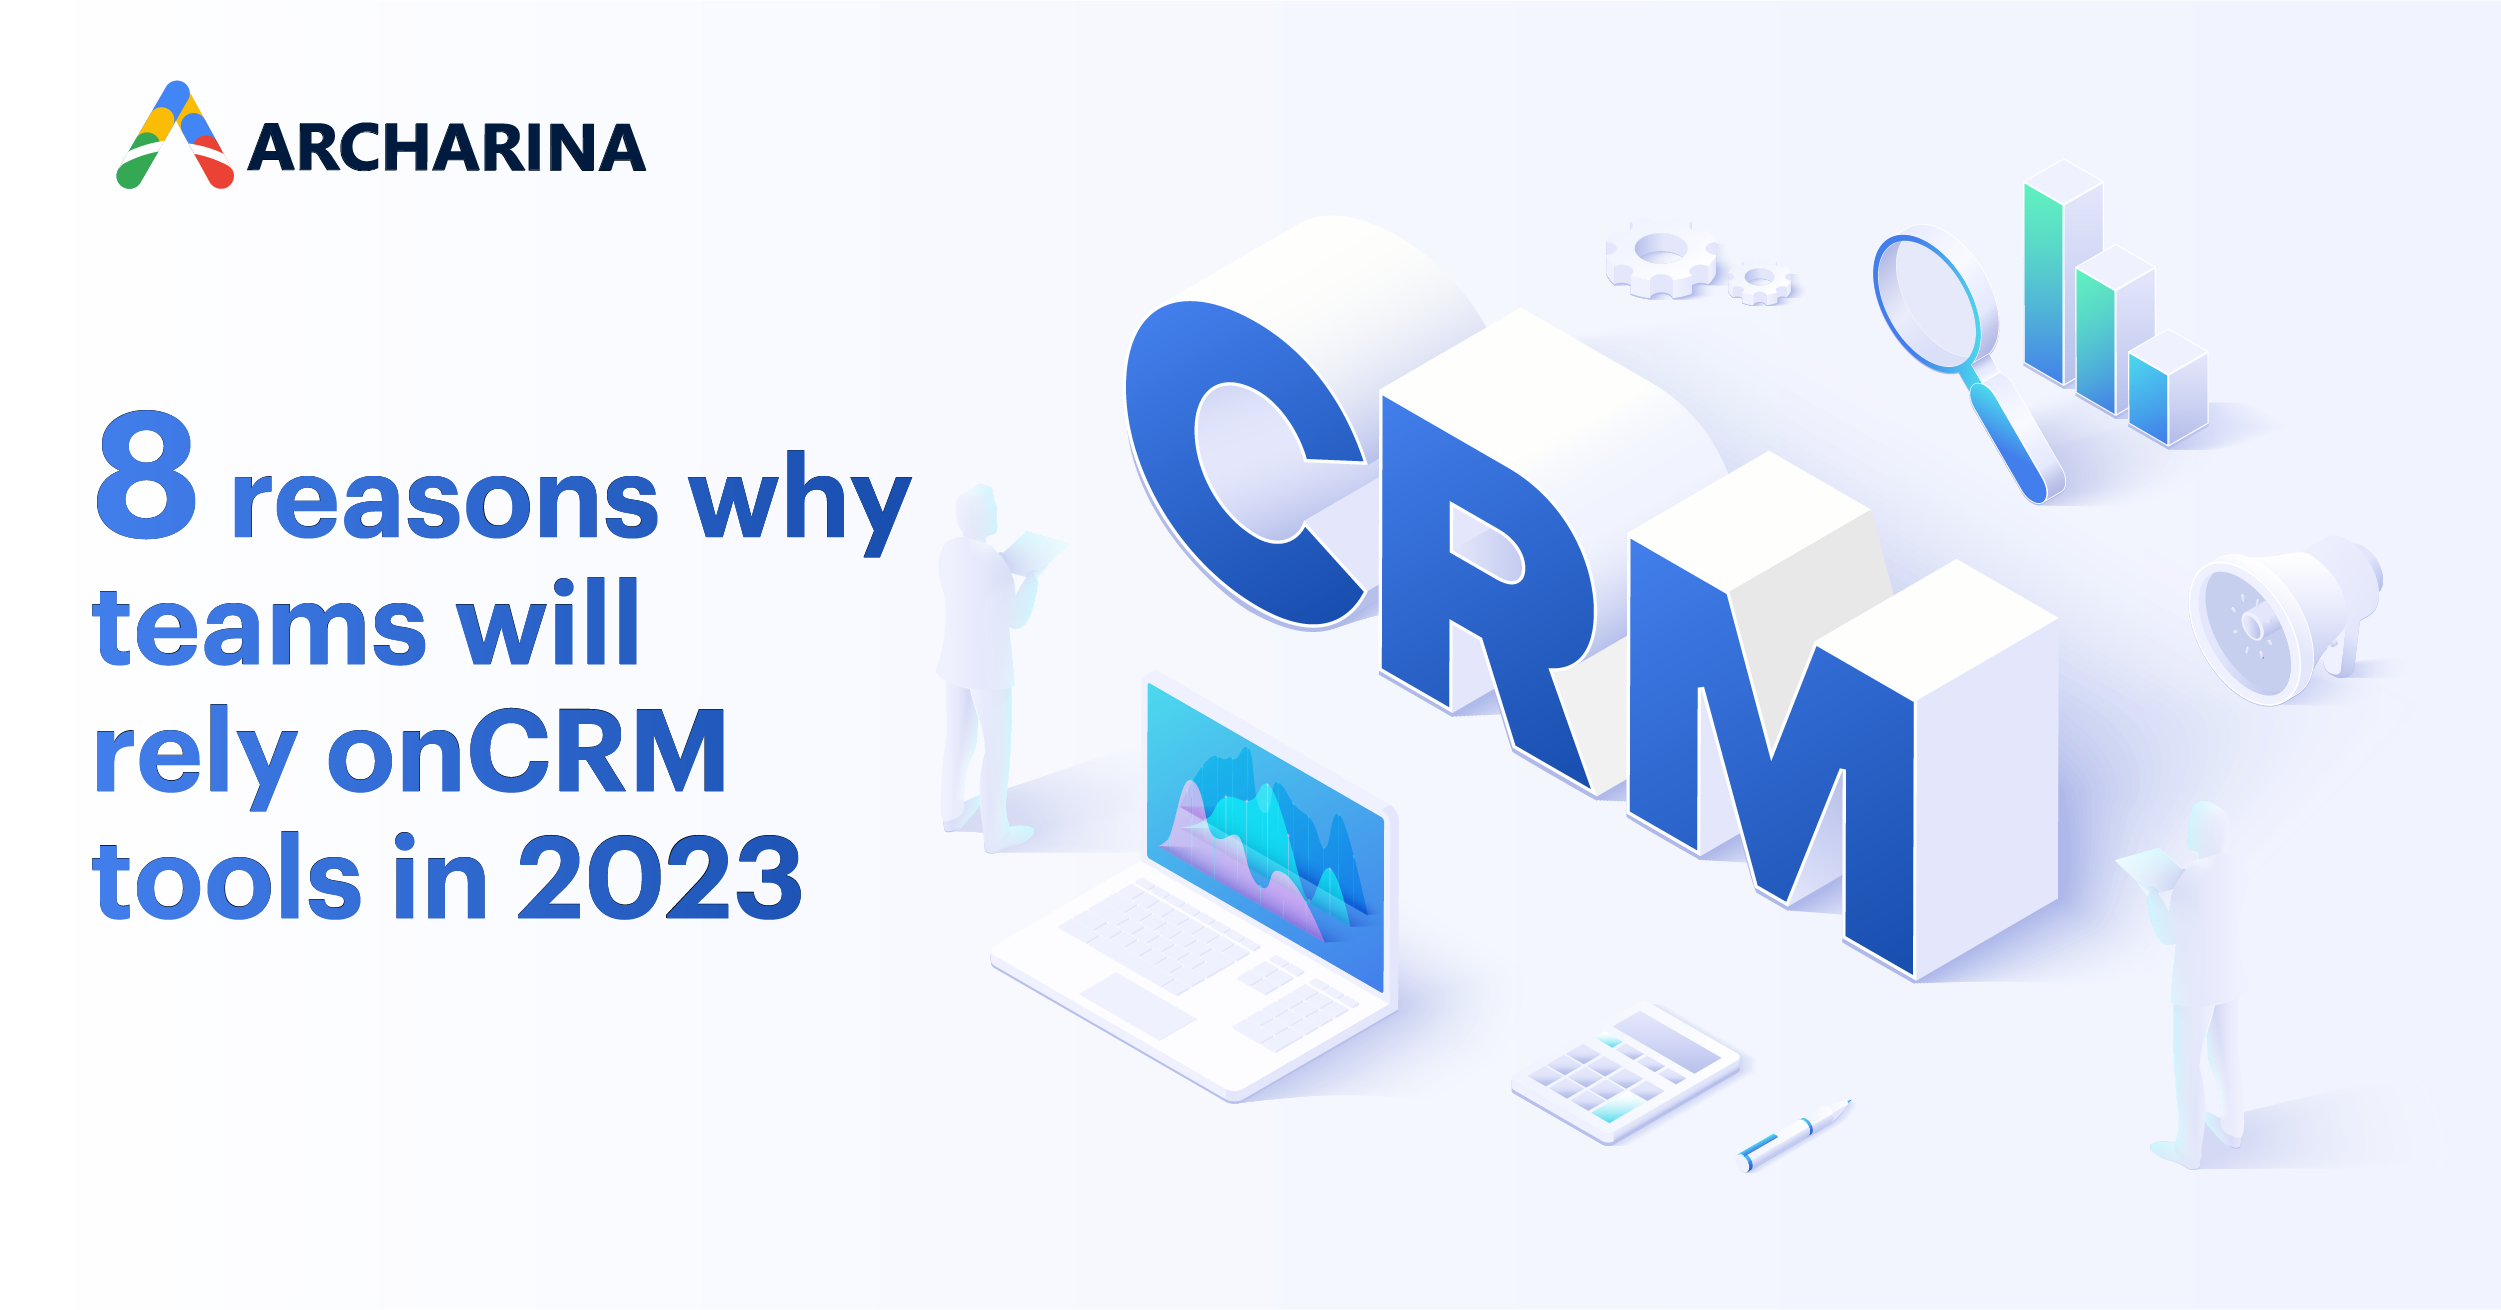 v8 reasons why teams will rely on CRM tools in 2023